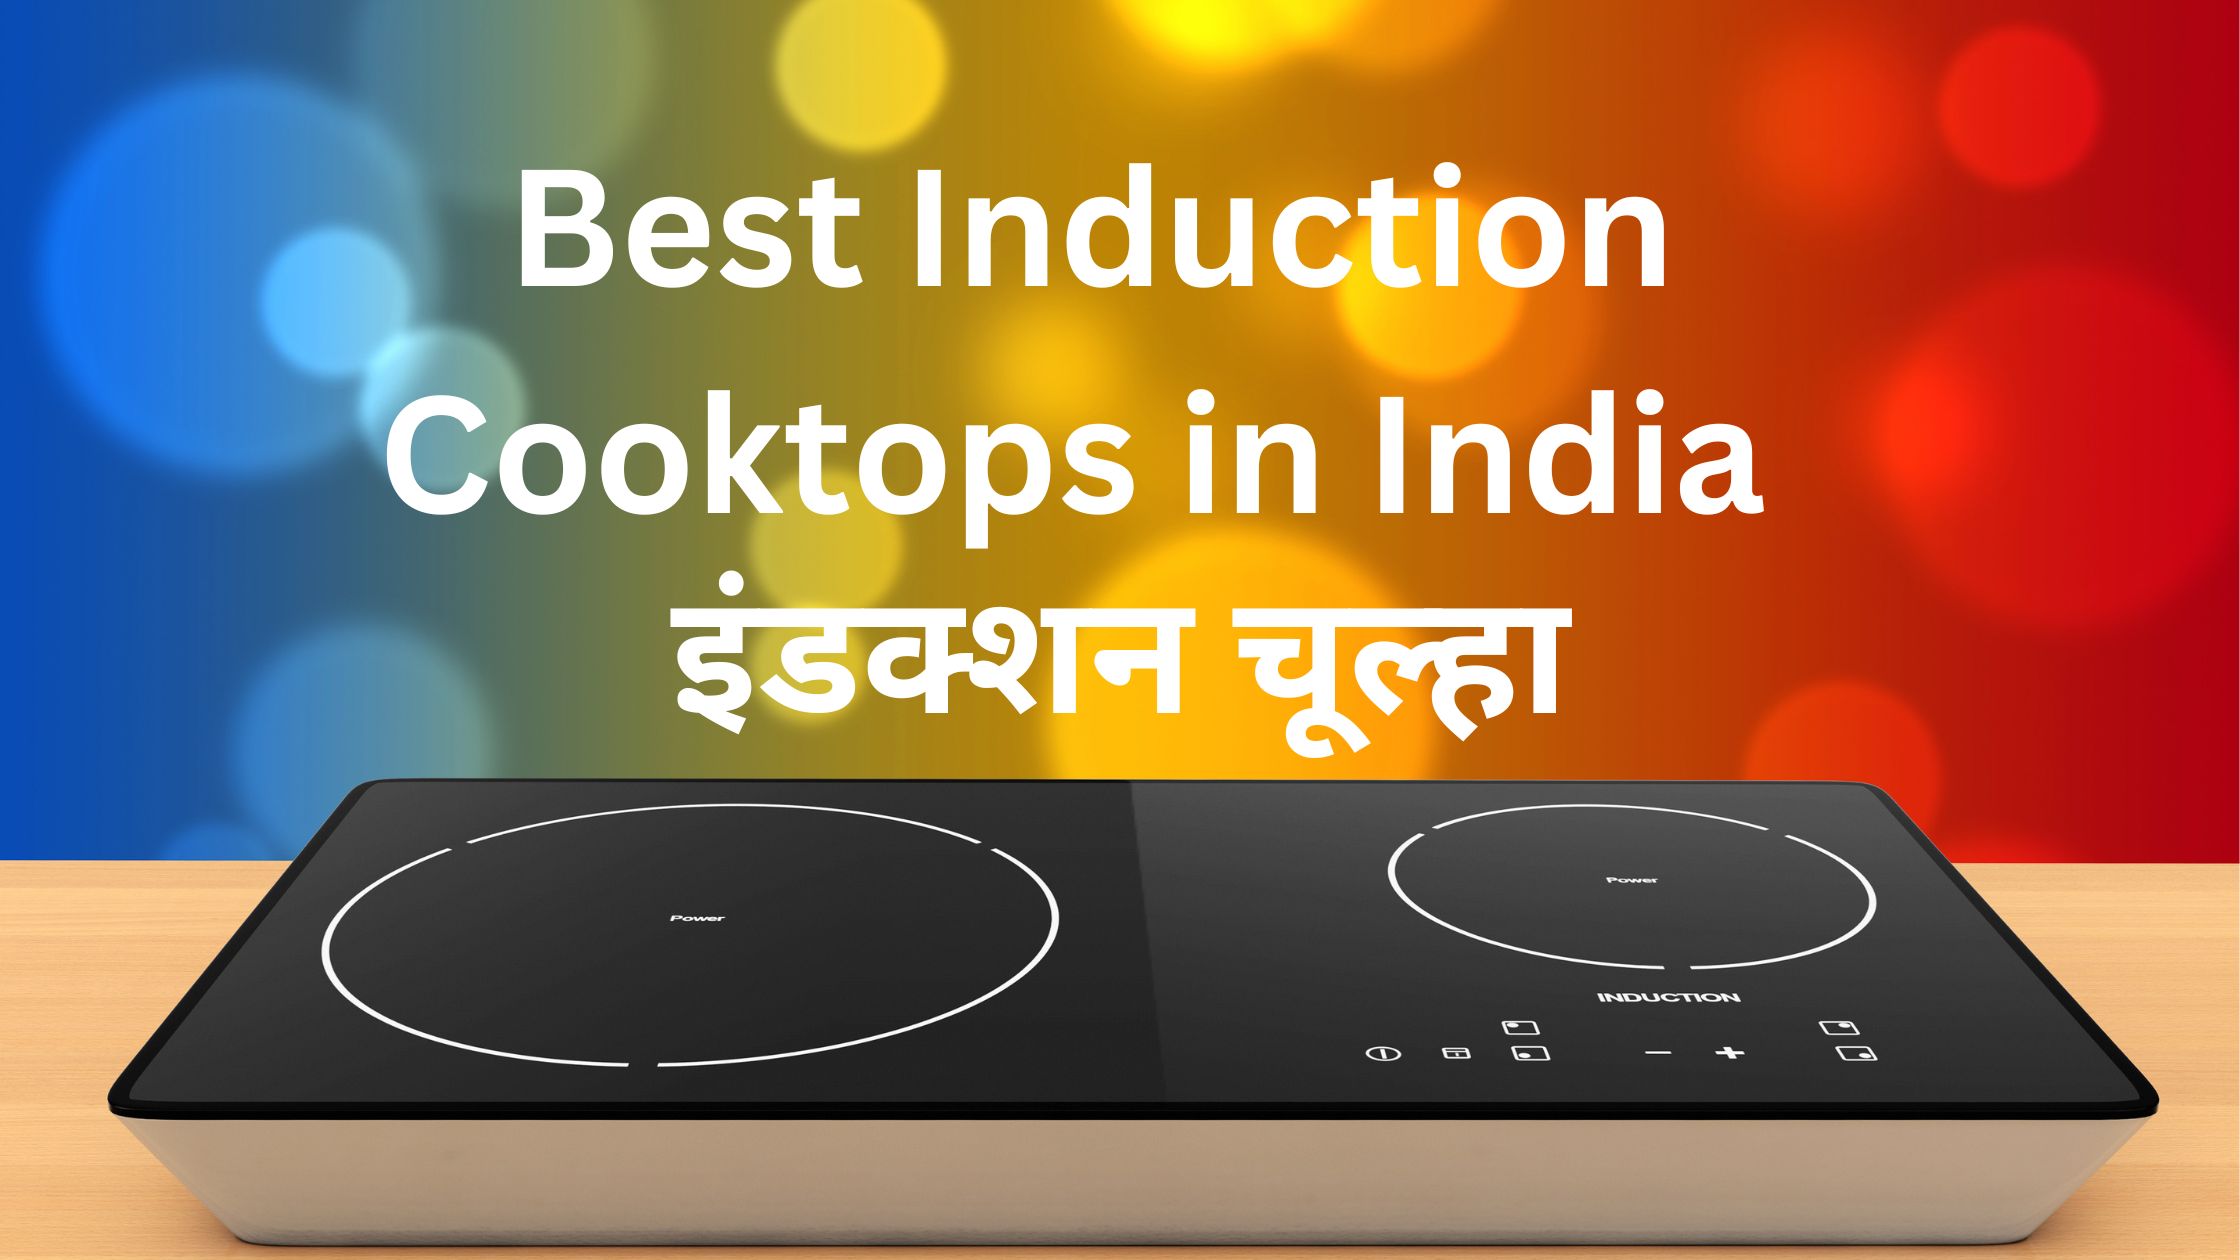 best Induction Cooktops in India